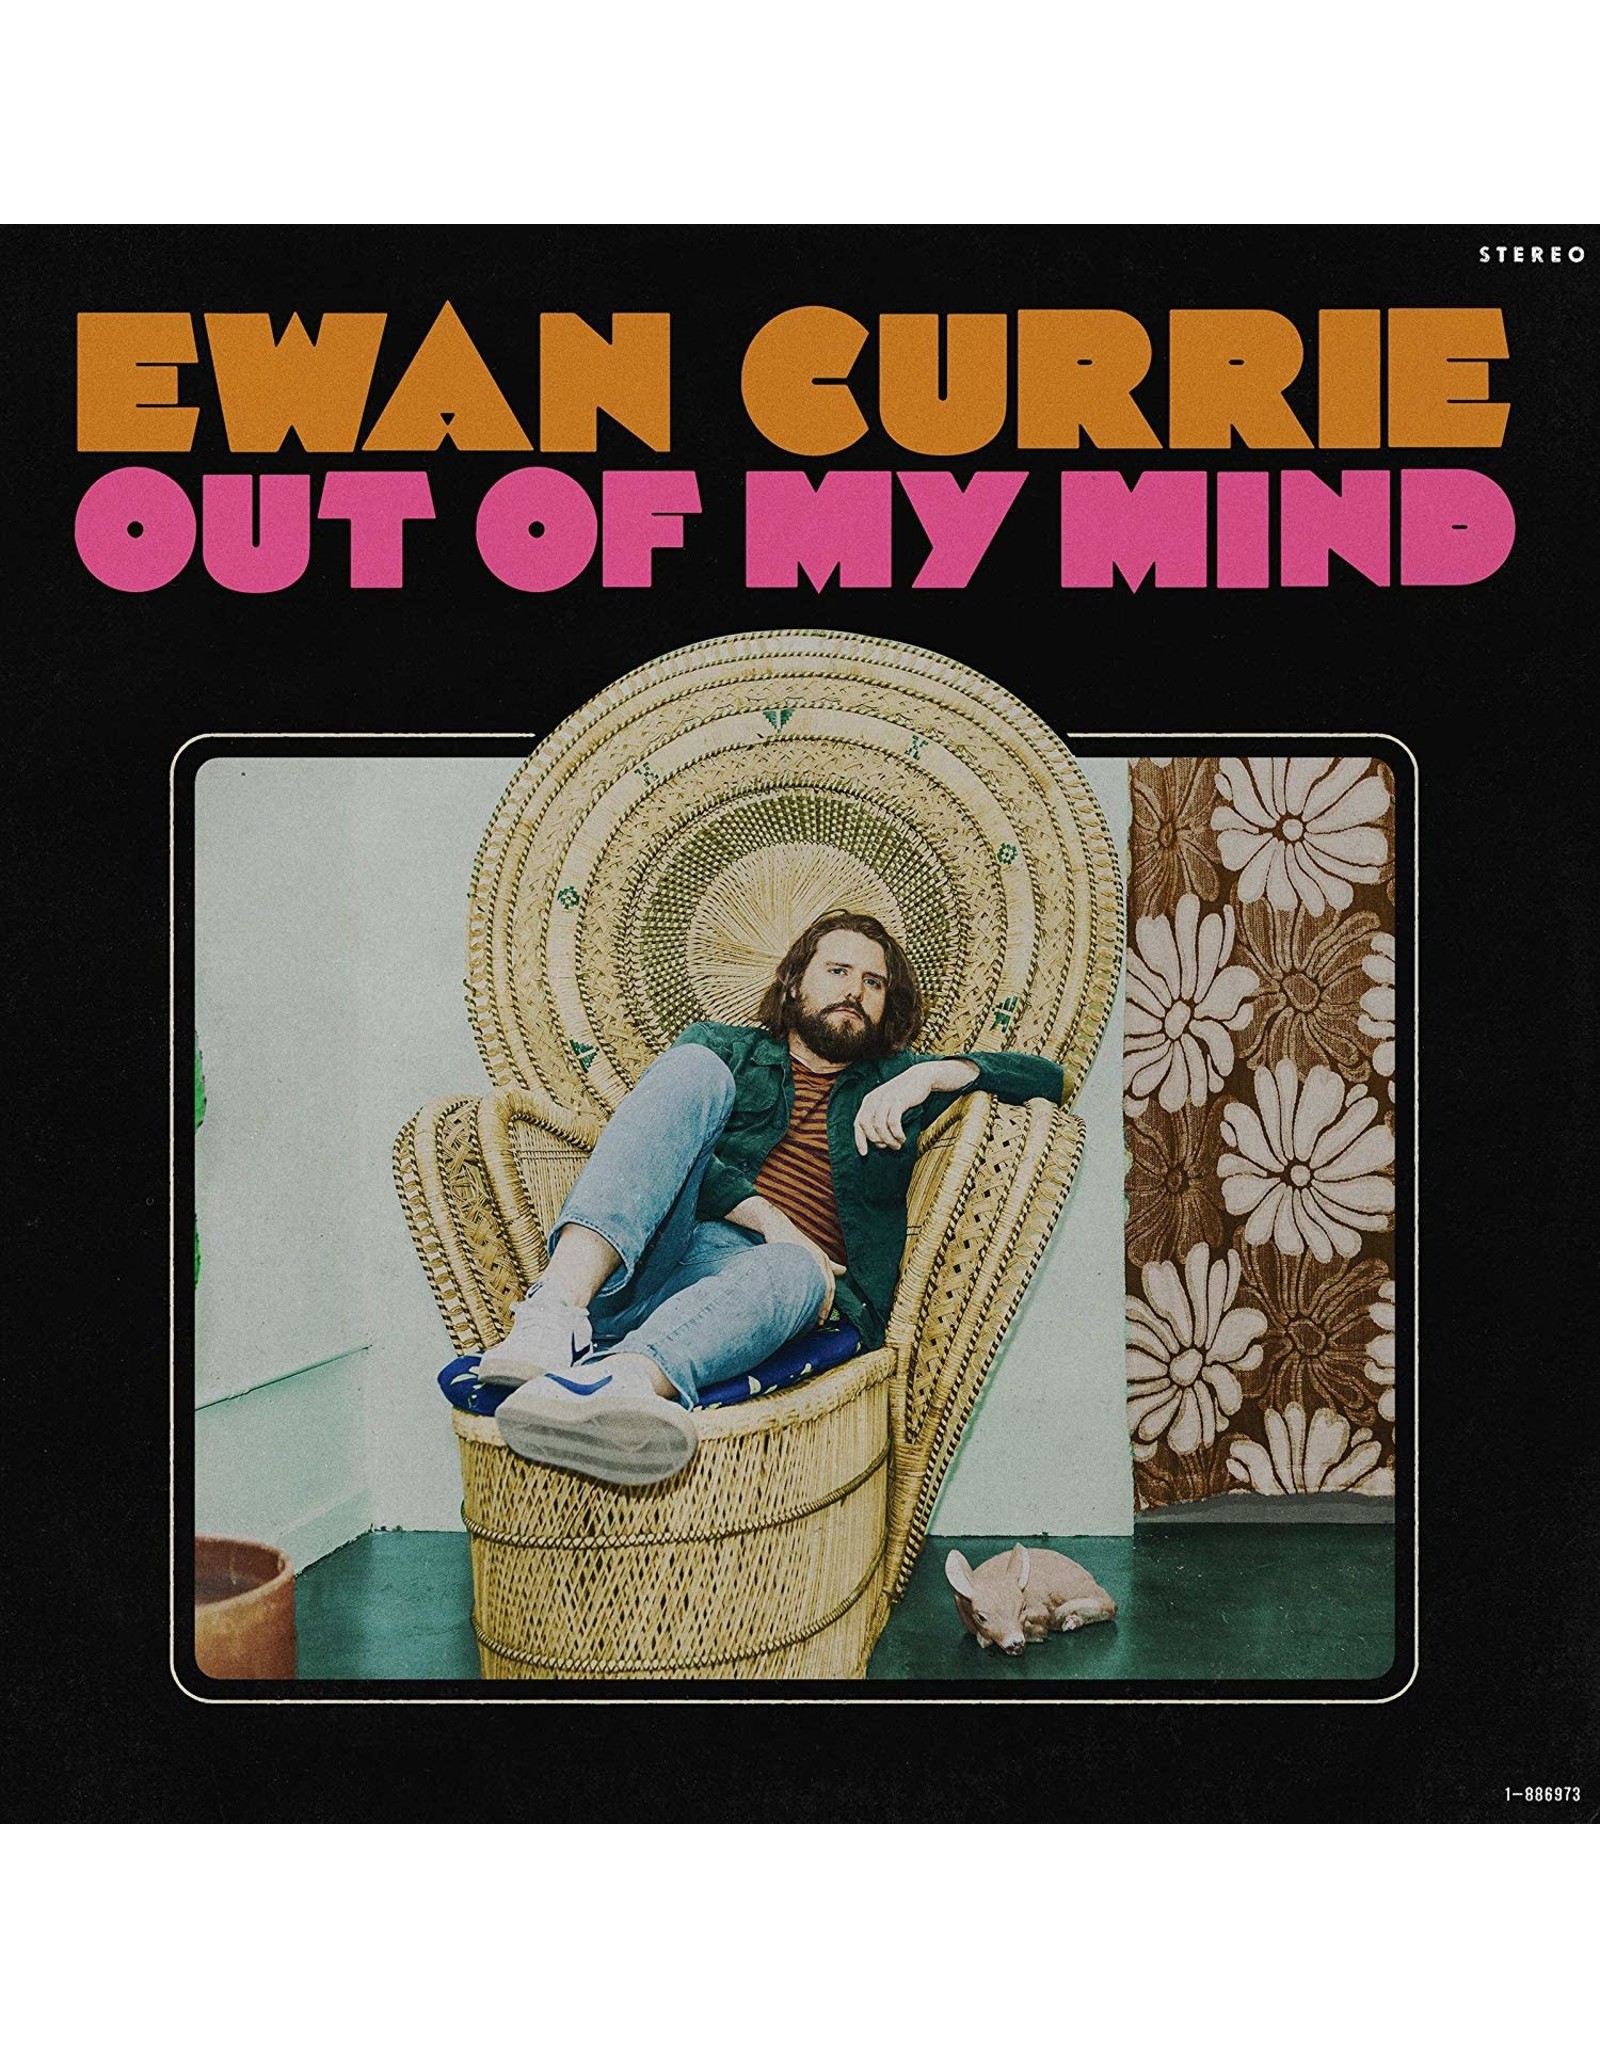 Ewan Currie - Out of My Mind